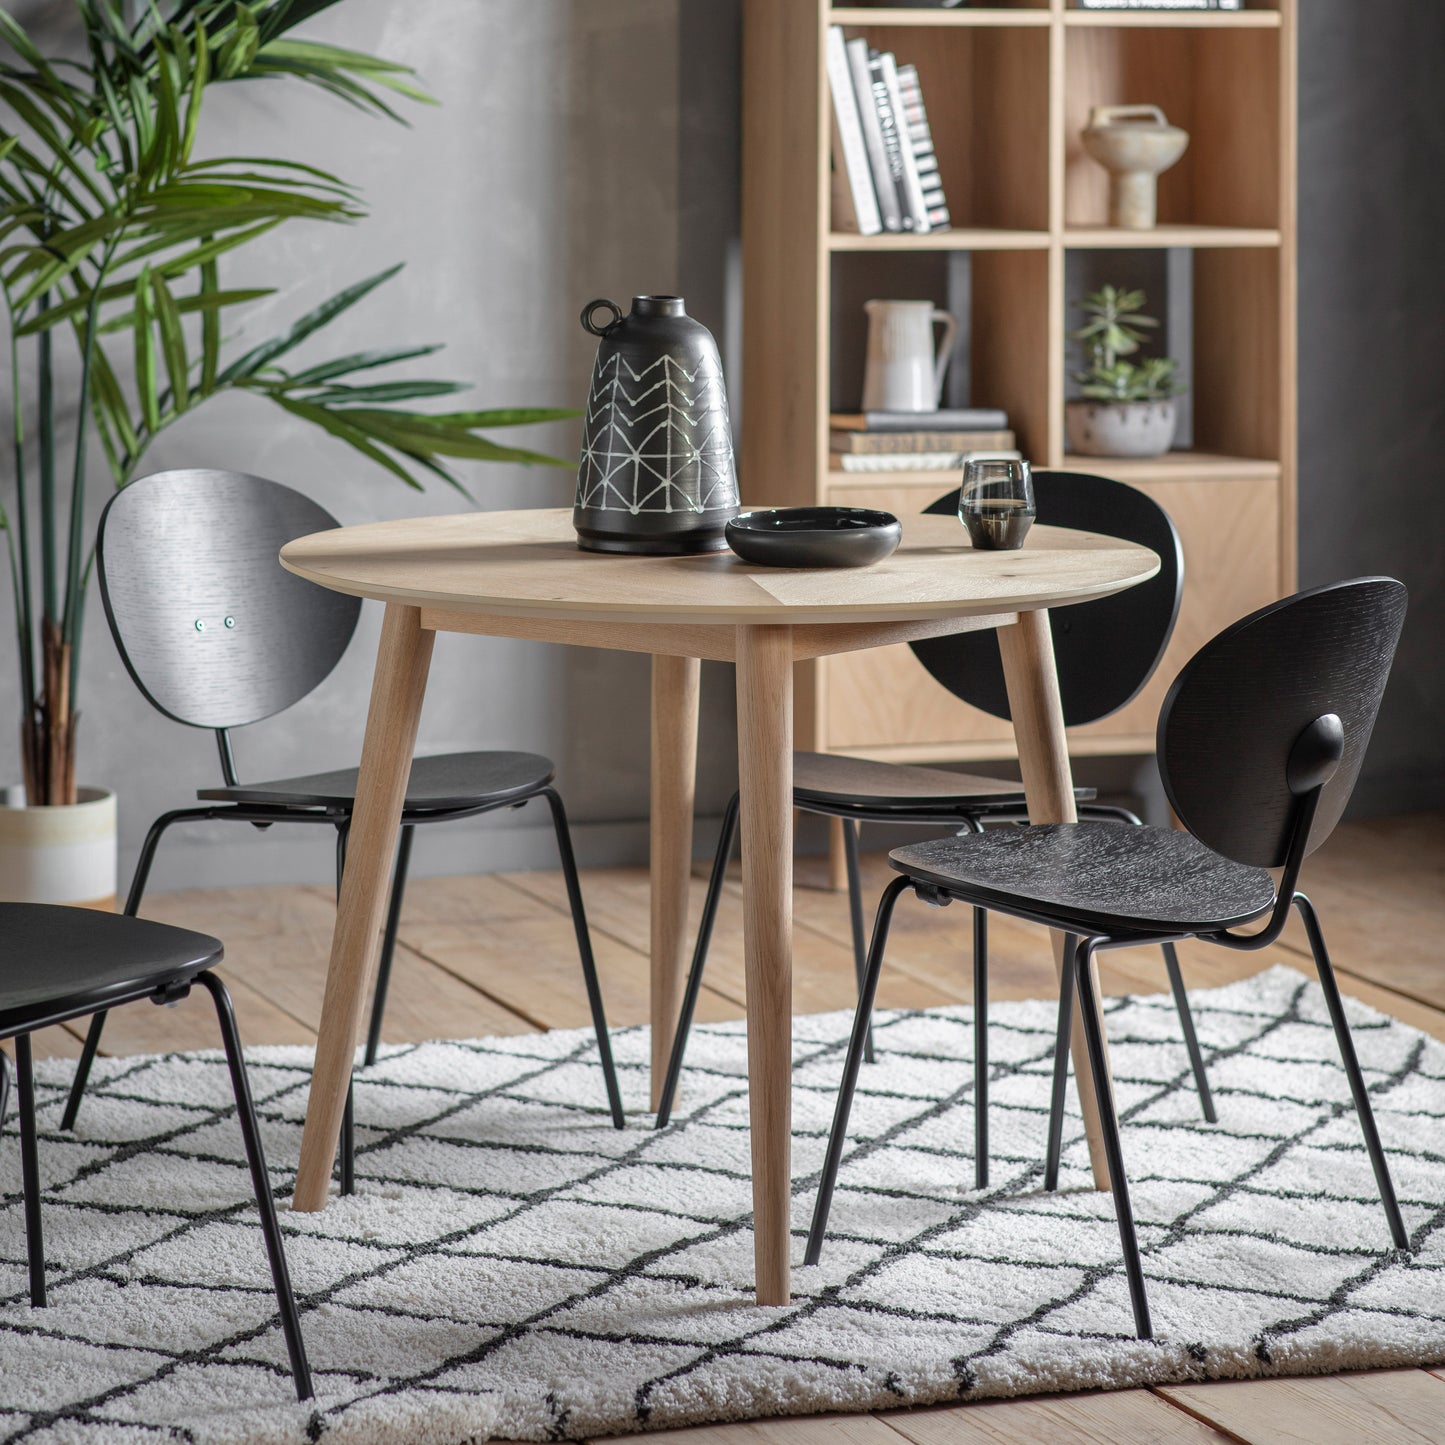 A Tristford Round Dining Table 1000x1000x700mm and chairs in a room with a plant, showcasing stylish home furniture and interior decor from Kikiathome.co.uk.